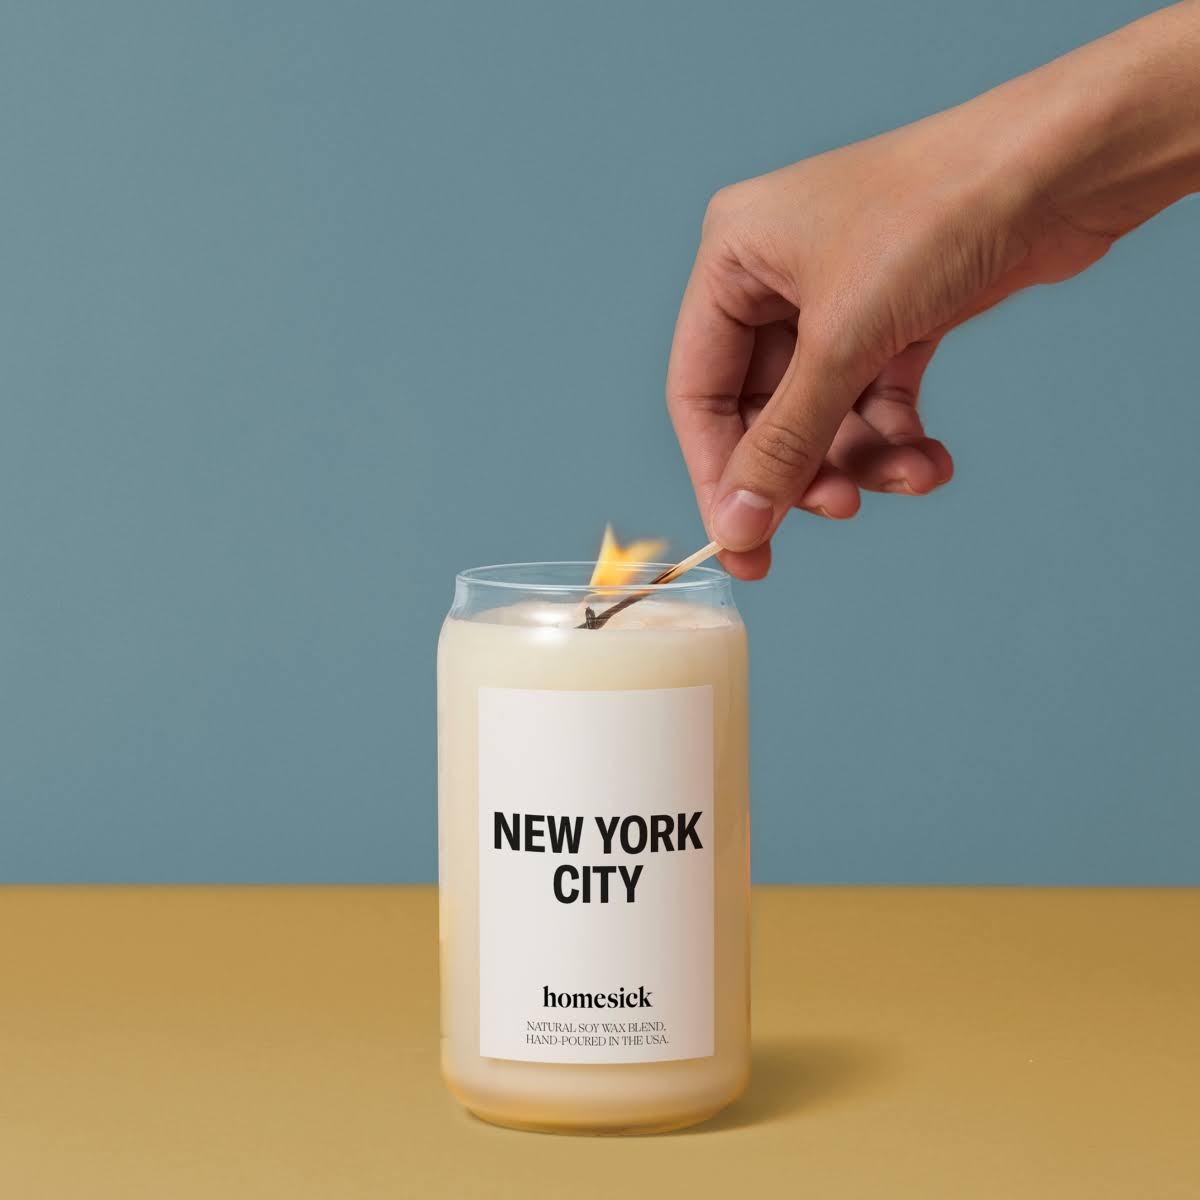 New York City Candle